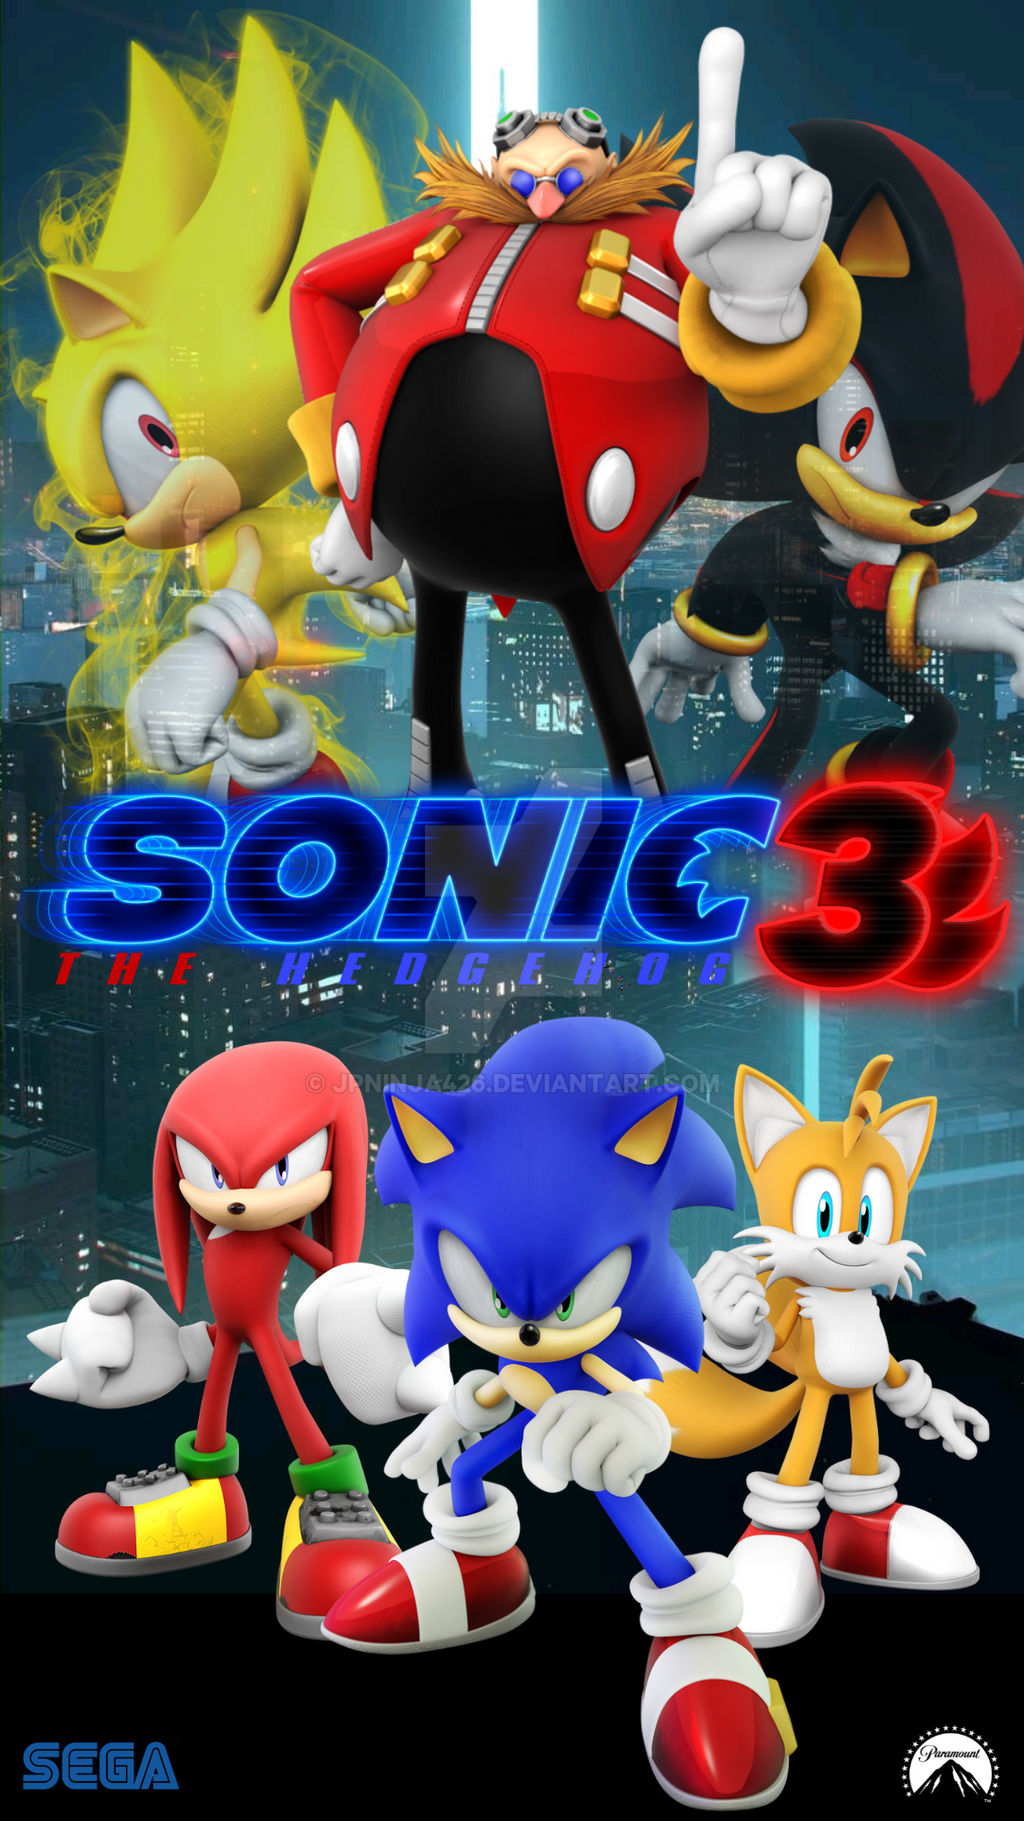 Sonic movienews on X: SPEED VS DARK! Sonic Movie 3 fan-Made poster created  by myself Sonicmovienews 🔥😆💙👀 Poster design: sonicmovienews 👀 #sonic  #SonicTheHedegehog #sonicmovie #sonicmovie3 #sonic3 #ShadowTheHedgehog  #Knuckles #knucklestheechidna